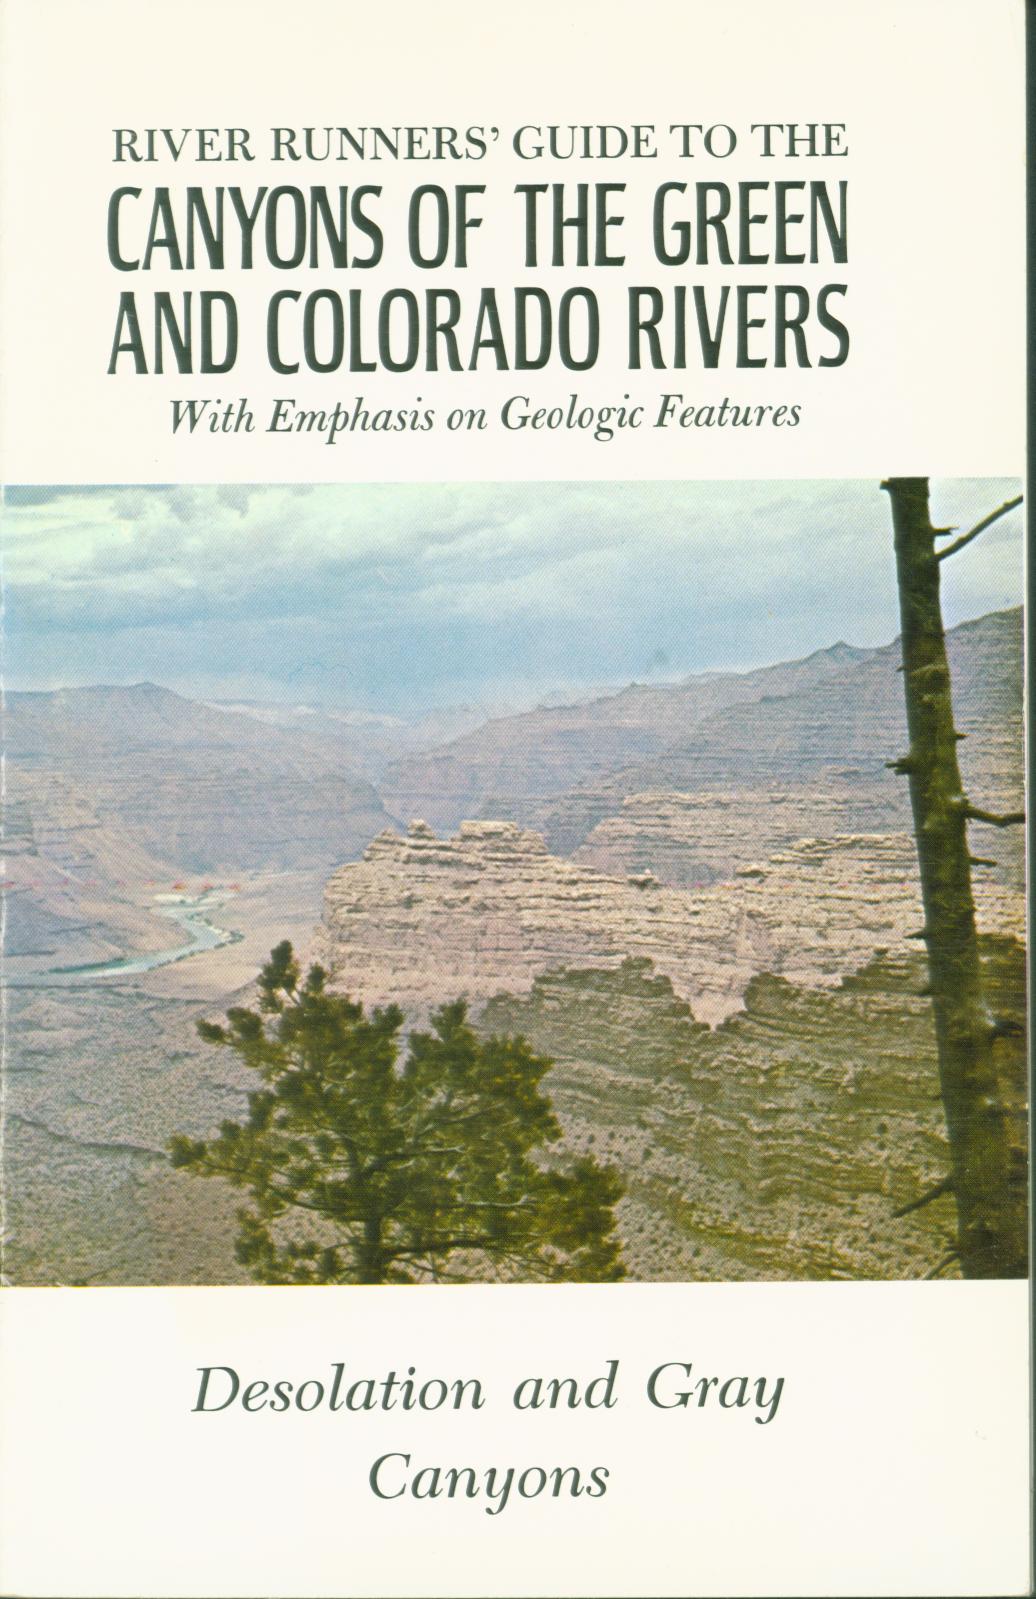 RIVER RUNNER'S GUIDE TO THE CANYONS OF THE GREEN AND COLORADO RIVERS--Desolation and Gray Canyons. 